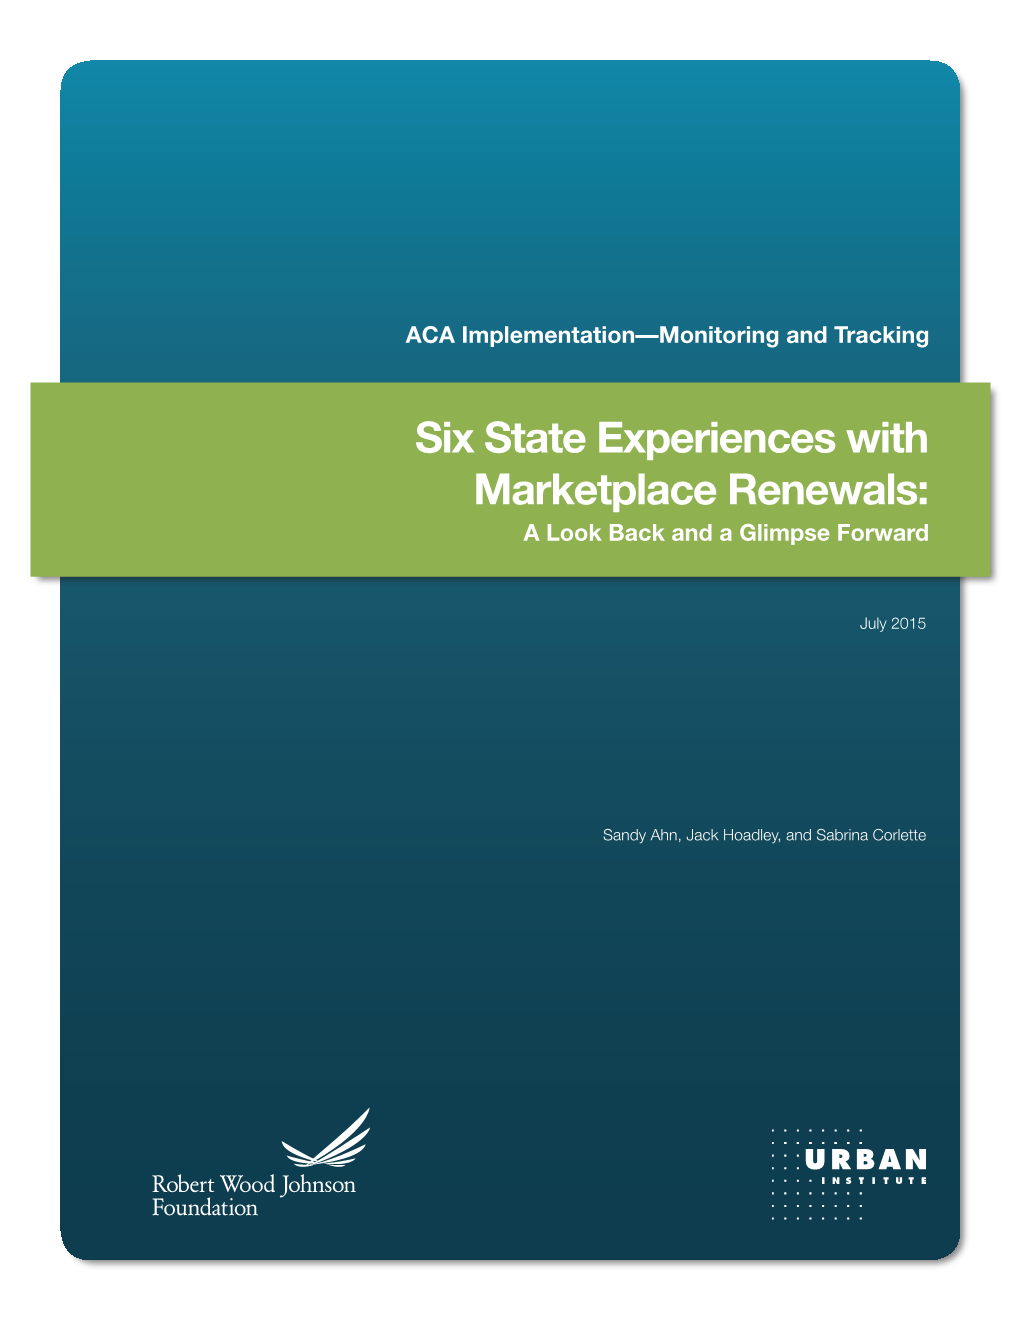 Six State Experiences with Marketplace Renewals: a Look Back and a Glimpse Forward